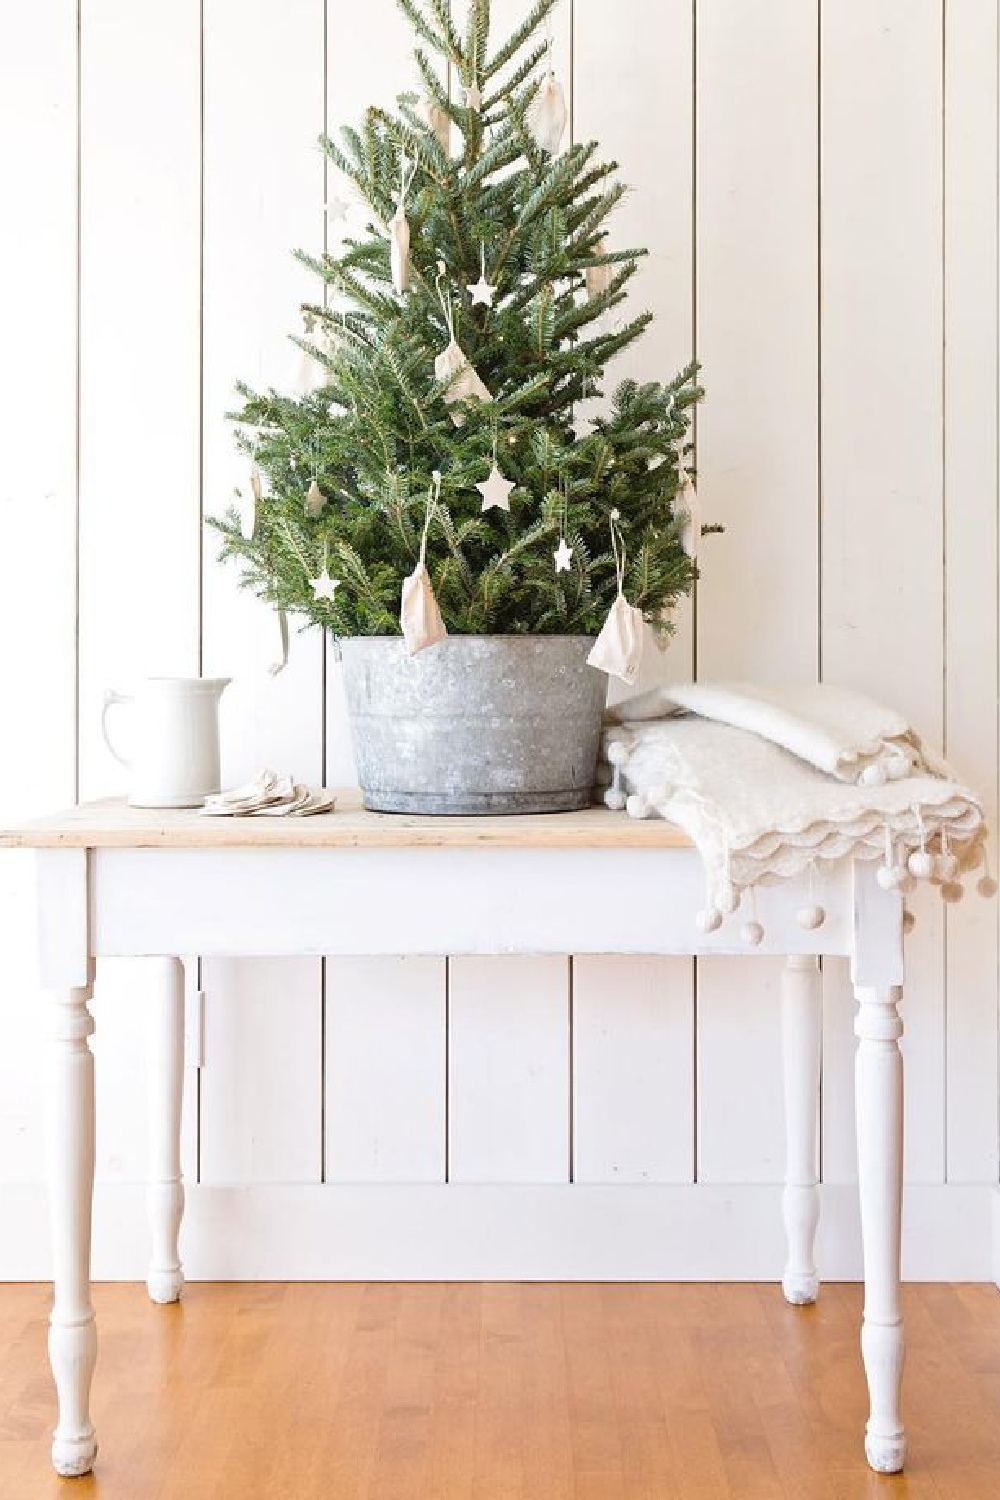 Farmhouse Christmas decor moment in a room with white shiplap, tree in galvanized pail and white farm table - A Rosy Note.